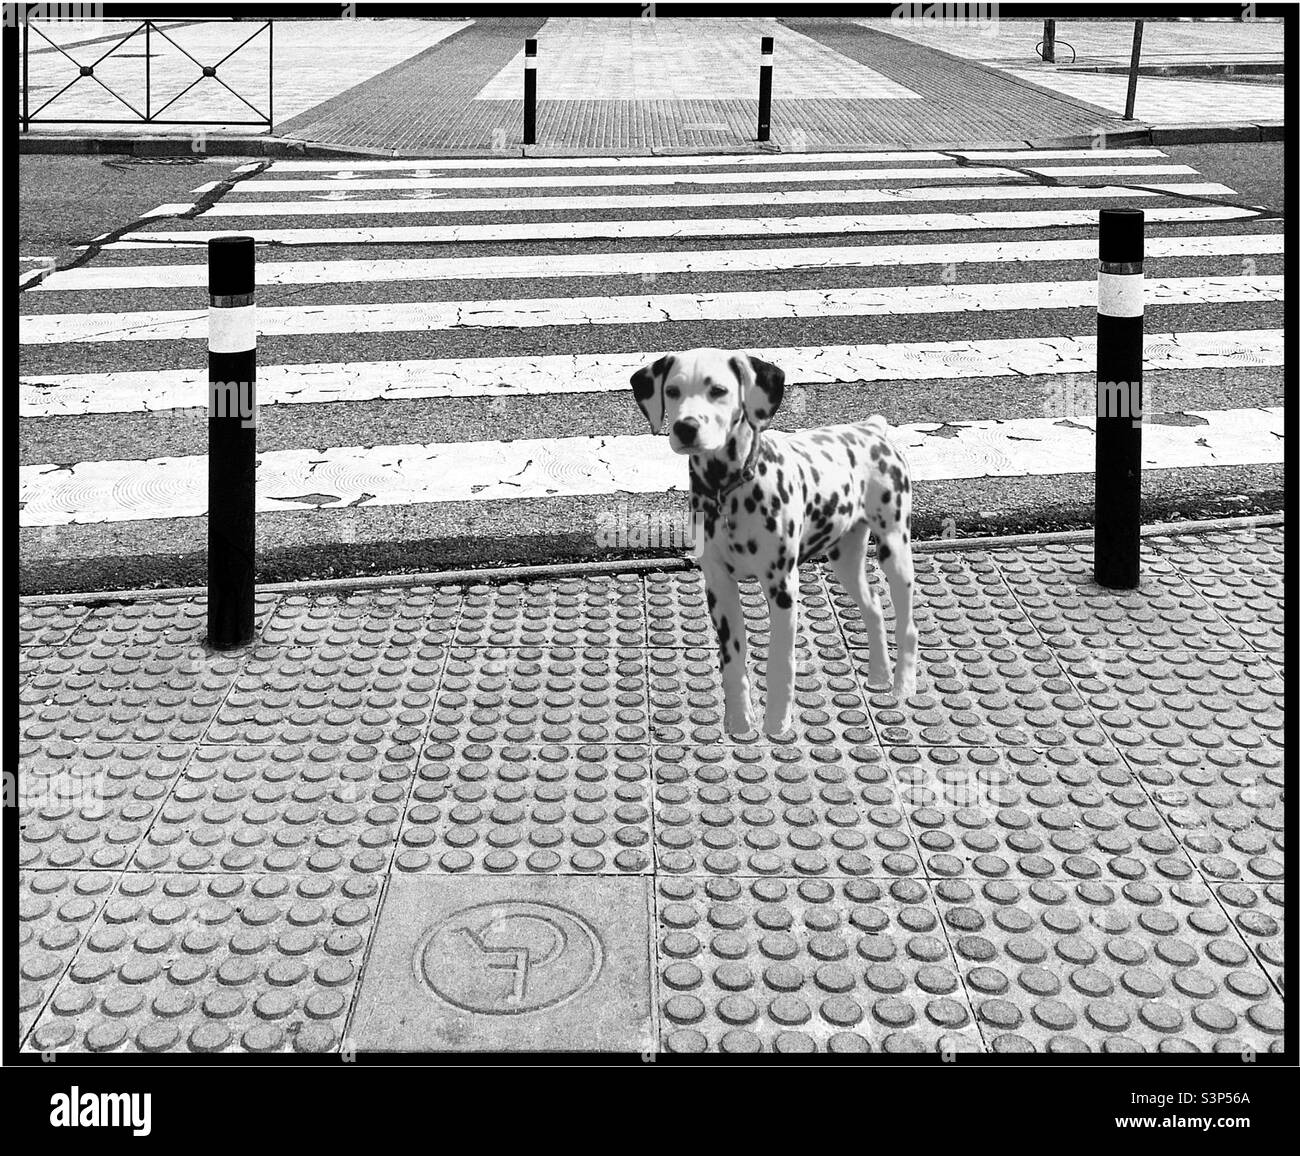 A Dalmatian dog is waiting patiently for its owner on the pavement by a zebra crossing. The photo is in black and white. Stock Photo